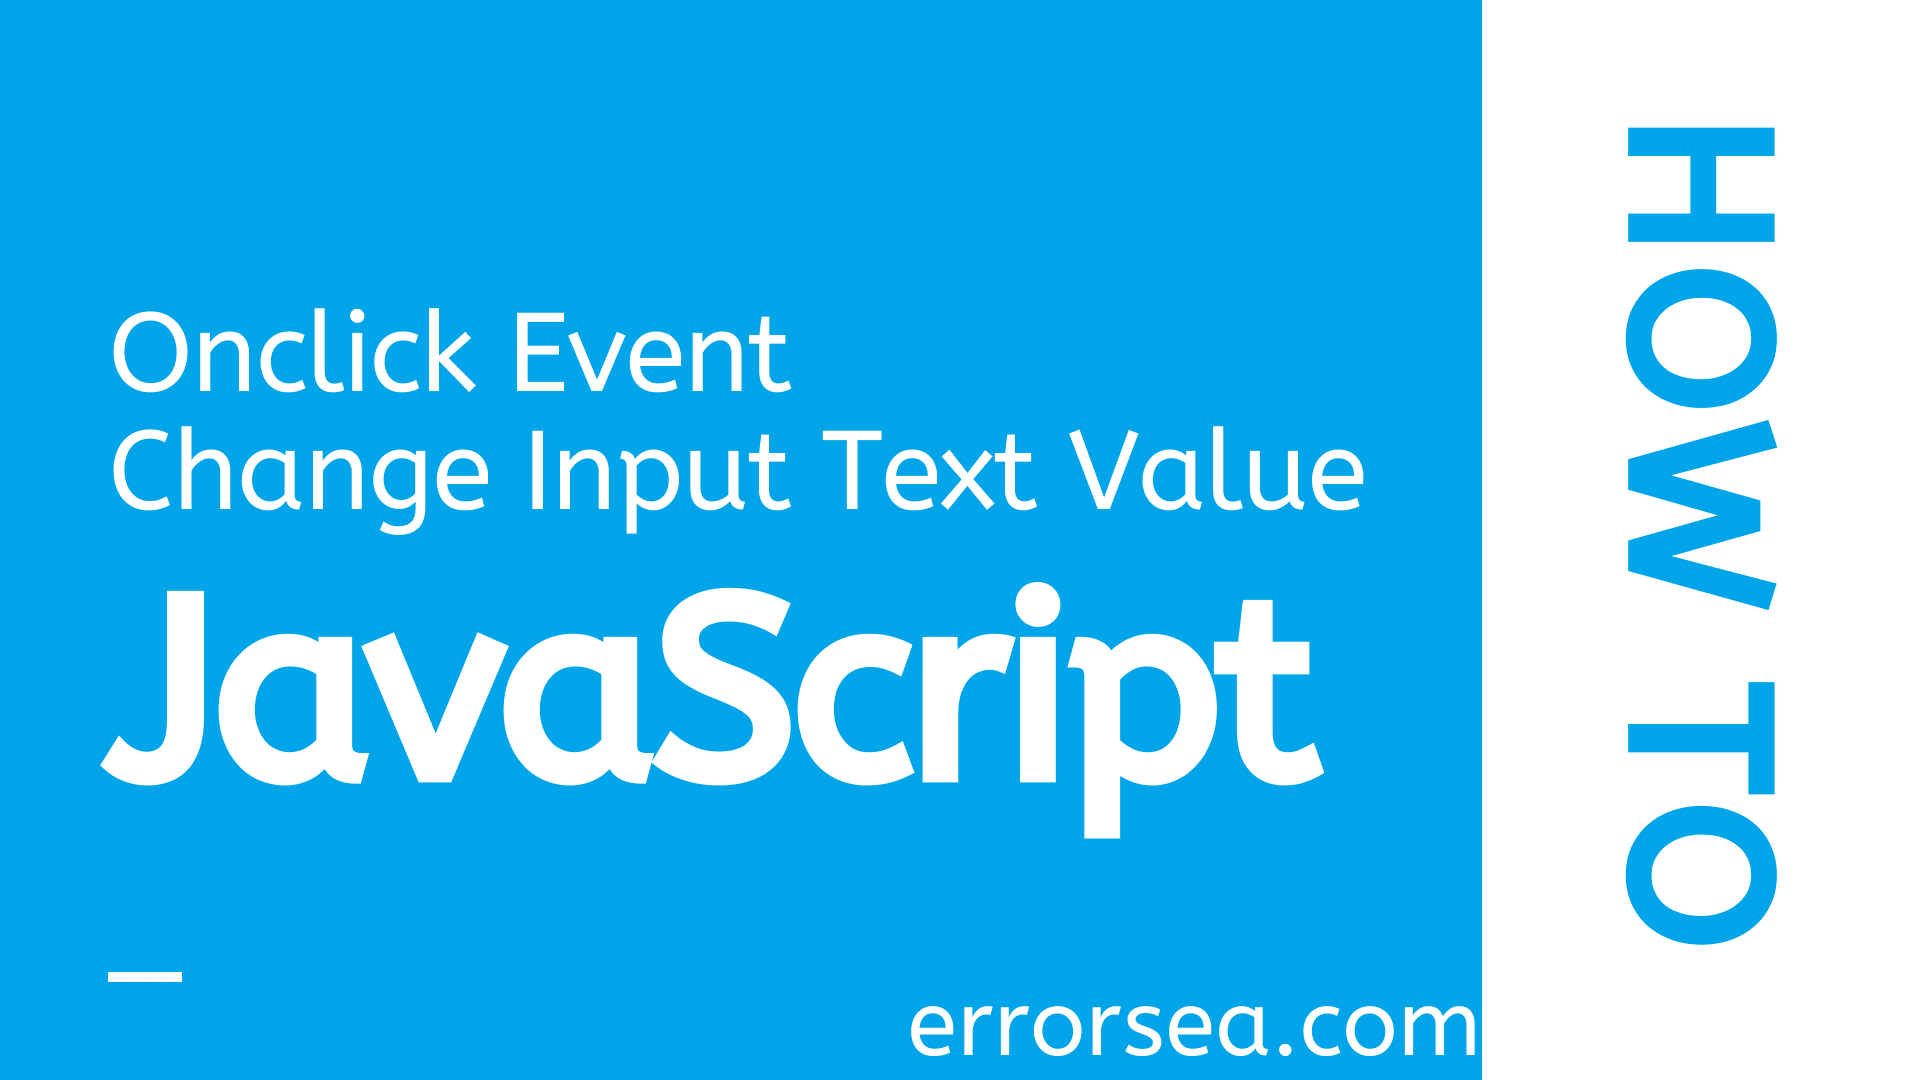 How to Change Input Text Value Onclick Event JavaScript